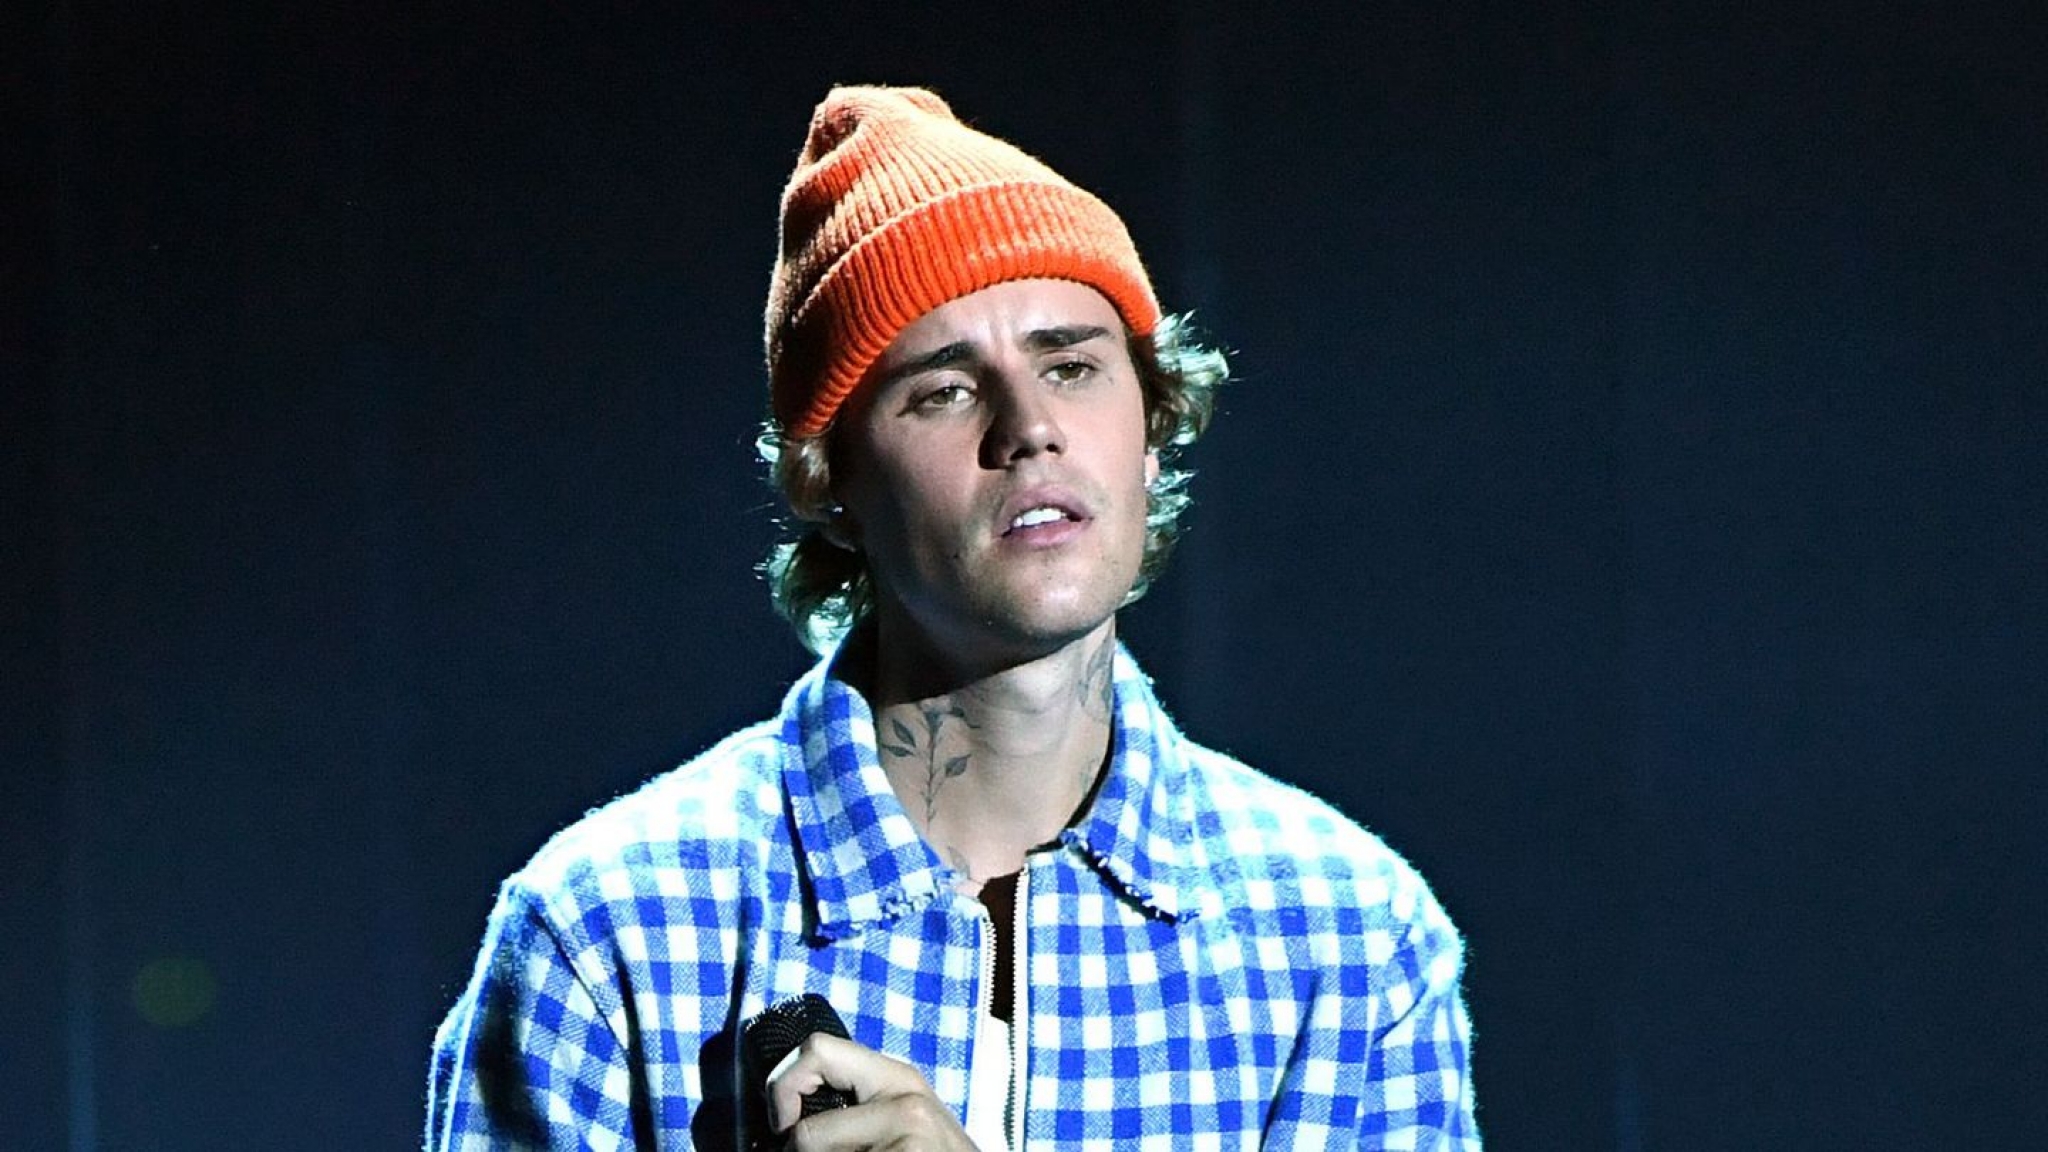 Justin Bieber Says ‘Ego’ and ‘Insecurities’ Made Him Question His Purpose